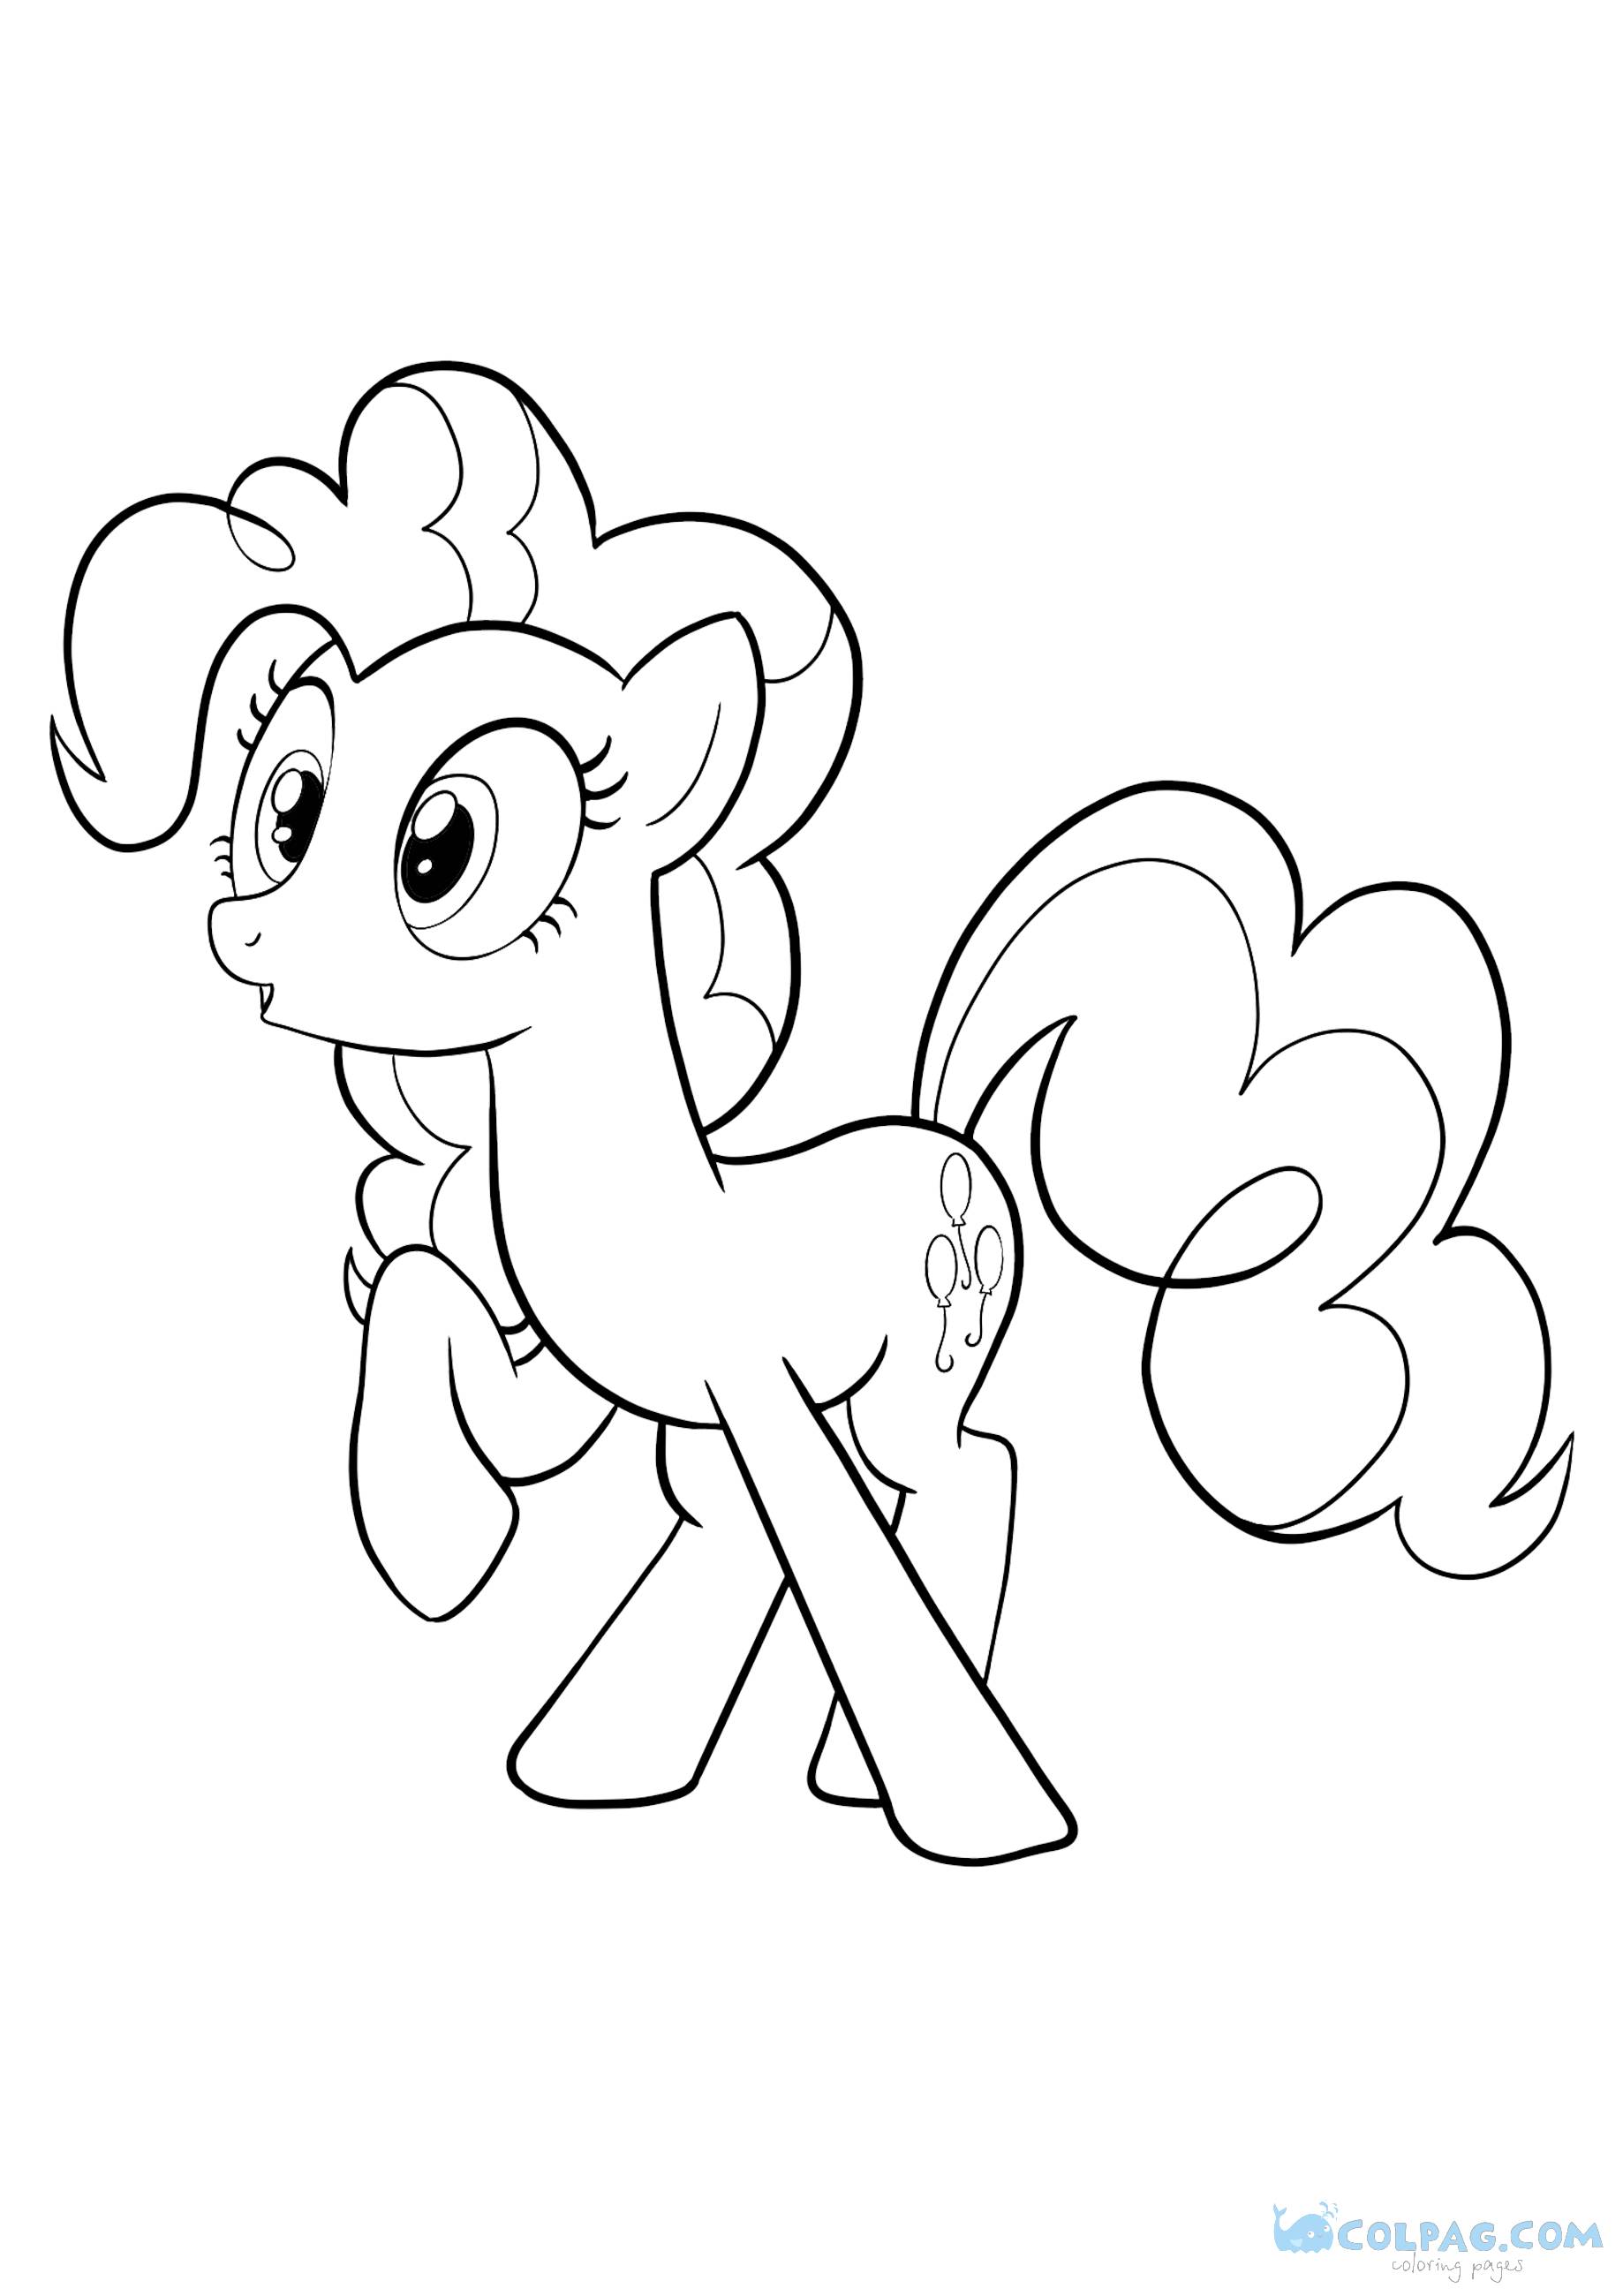 Pinky Pie Coloring Pages to Print